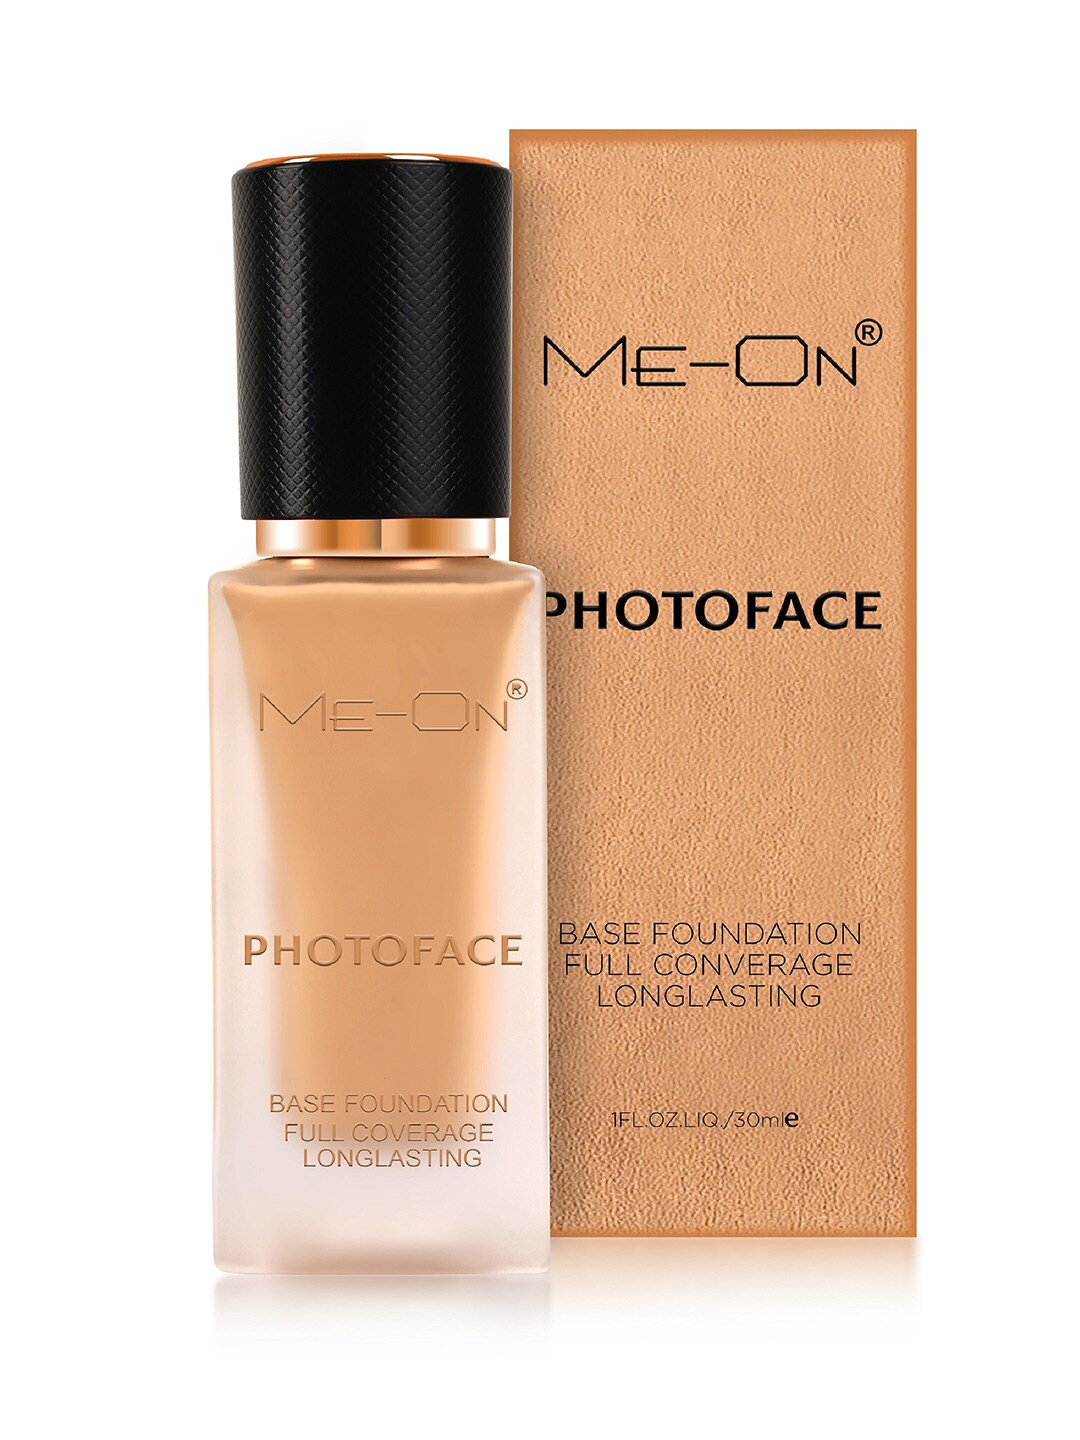 ME-ON Photoface Base Foundation (Shade 02) Price in India